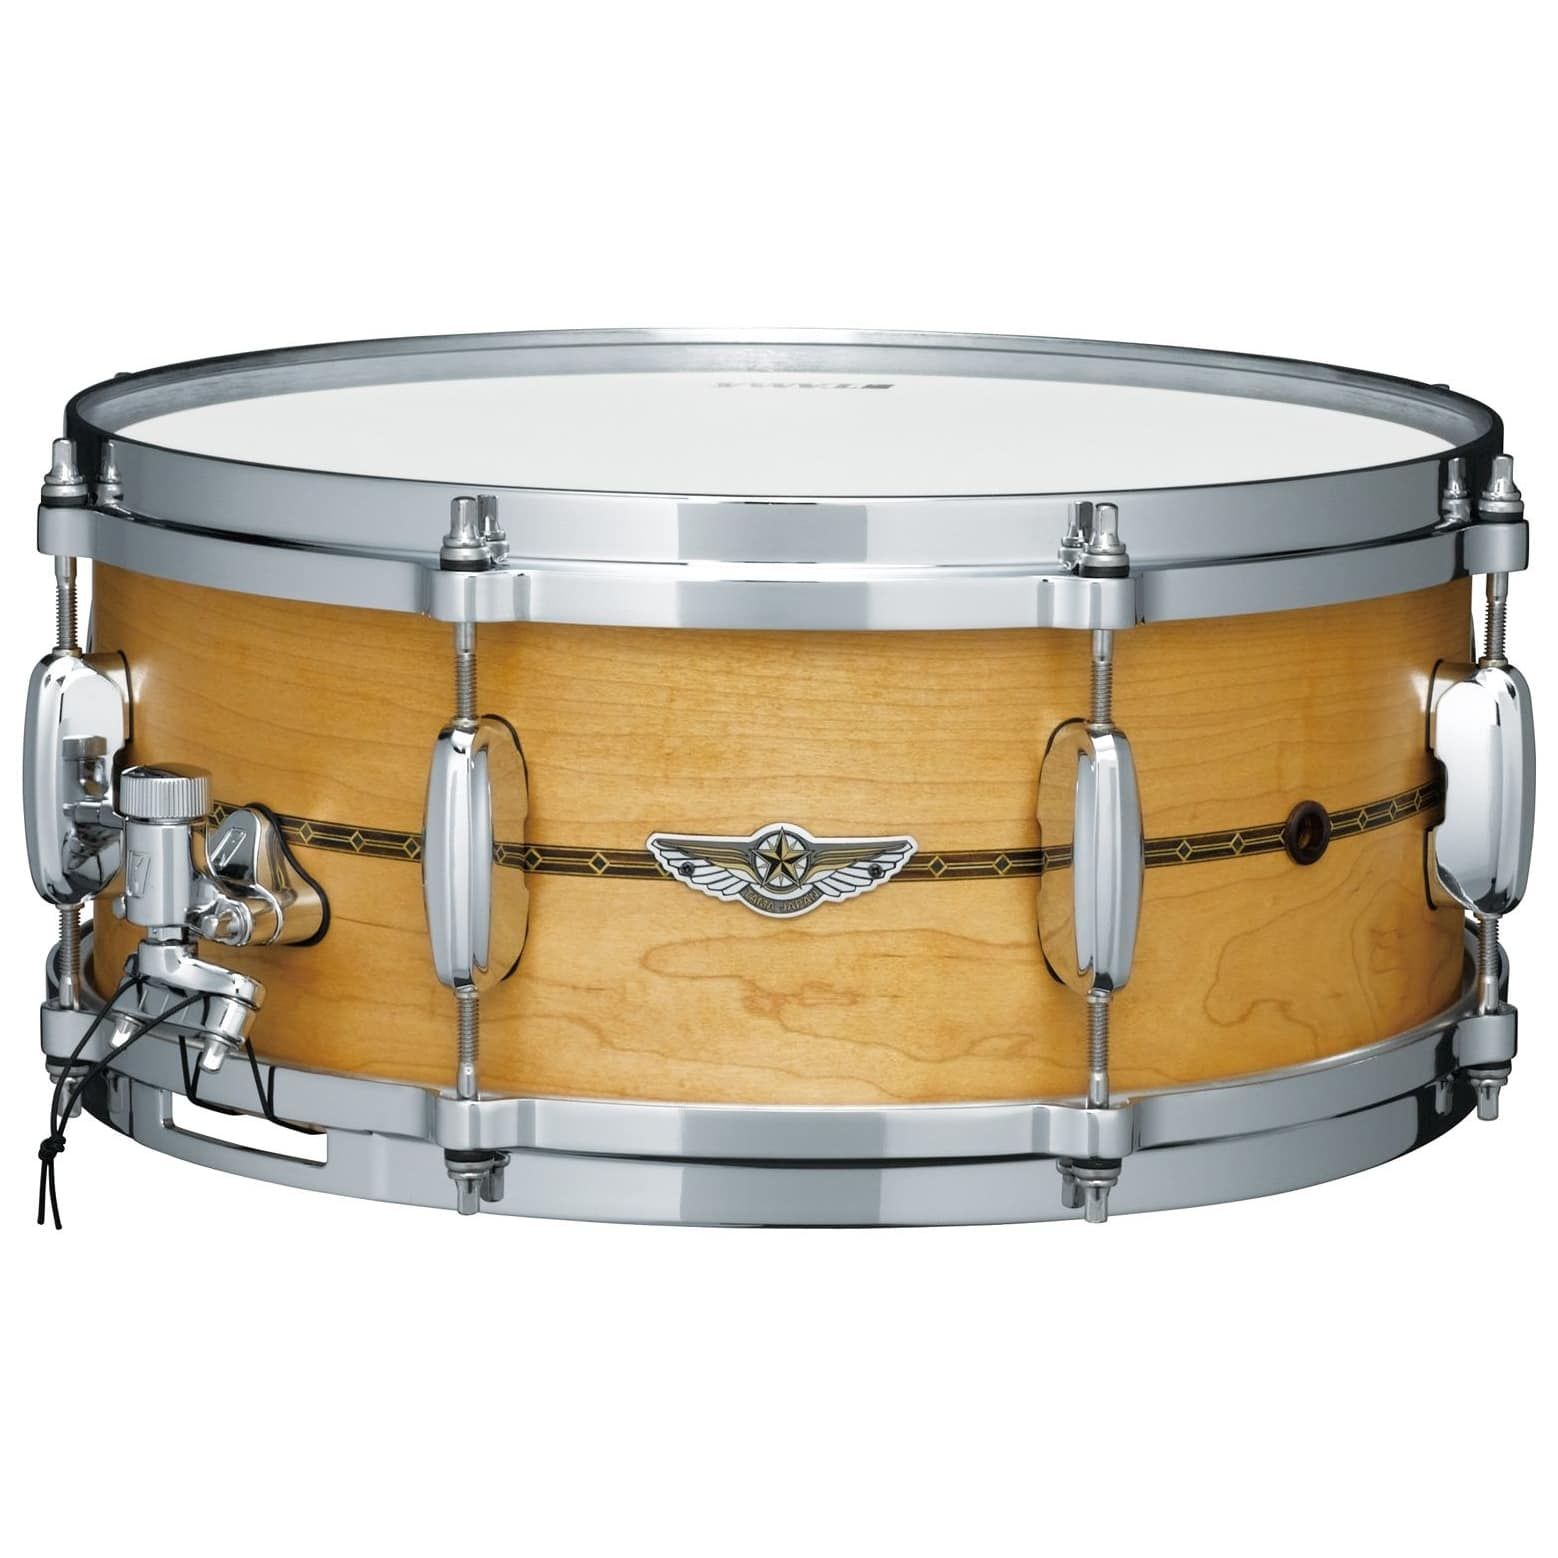 Tama TLM146S-OMP STAR Snaredrum - Oiled Natural Maple 14" x 6"